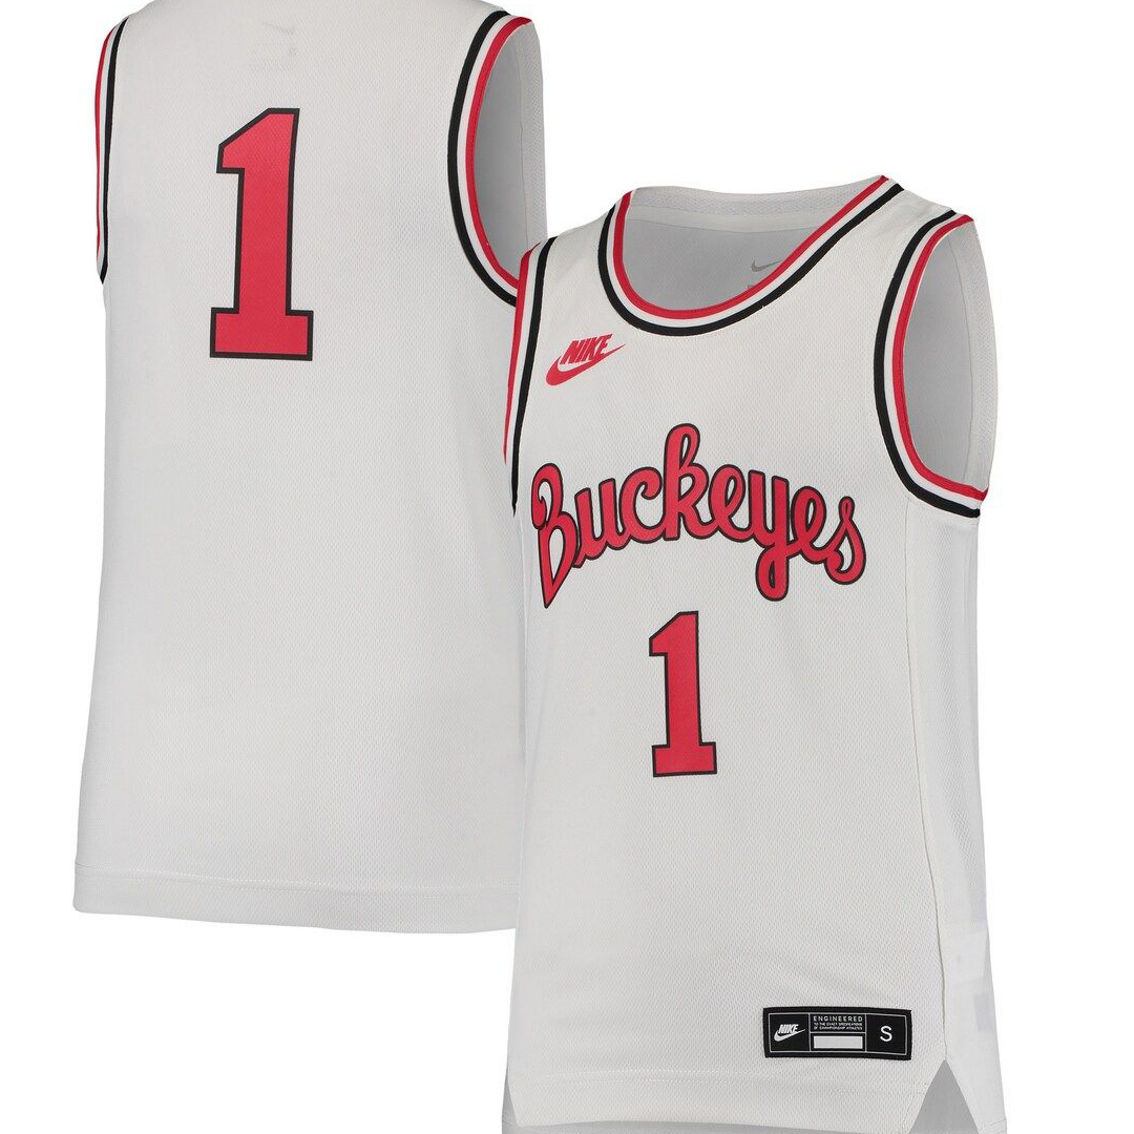 Nike Youth #1 White Ohio State Buckeyes Throwback Team Replica Basketball Jersey - Image 2 of 4